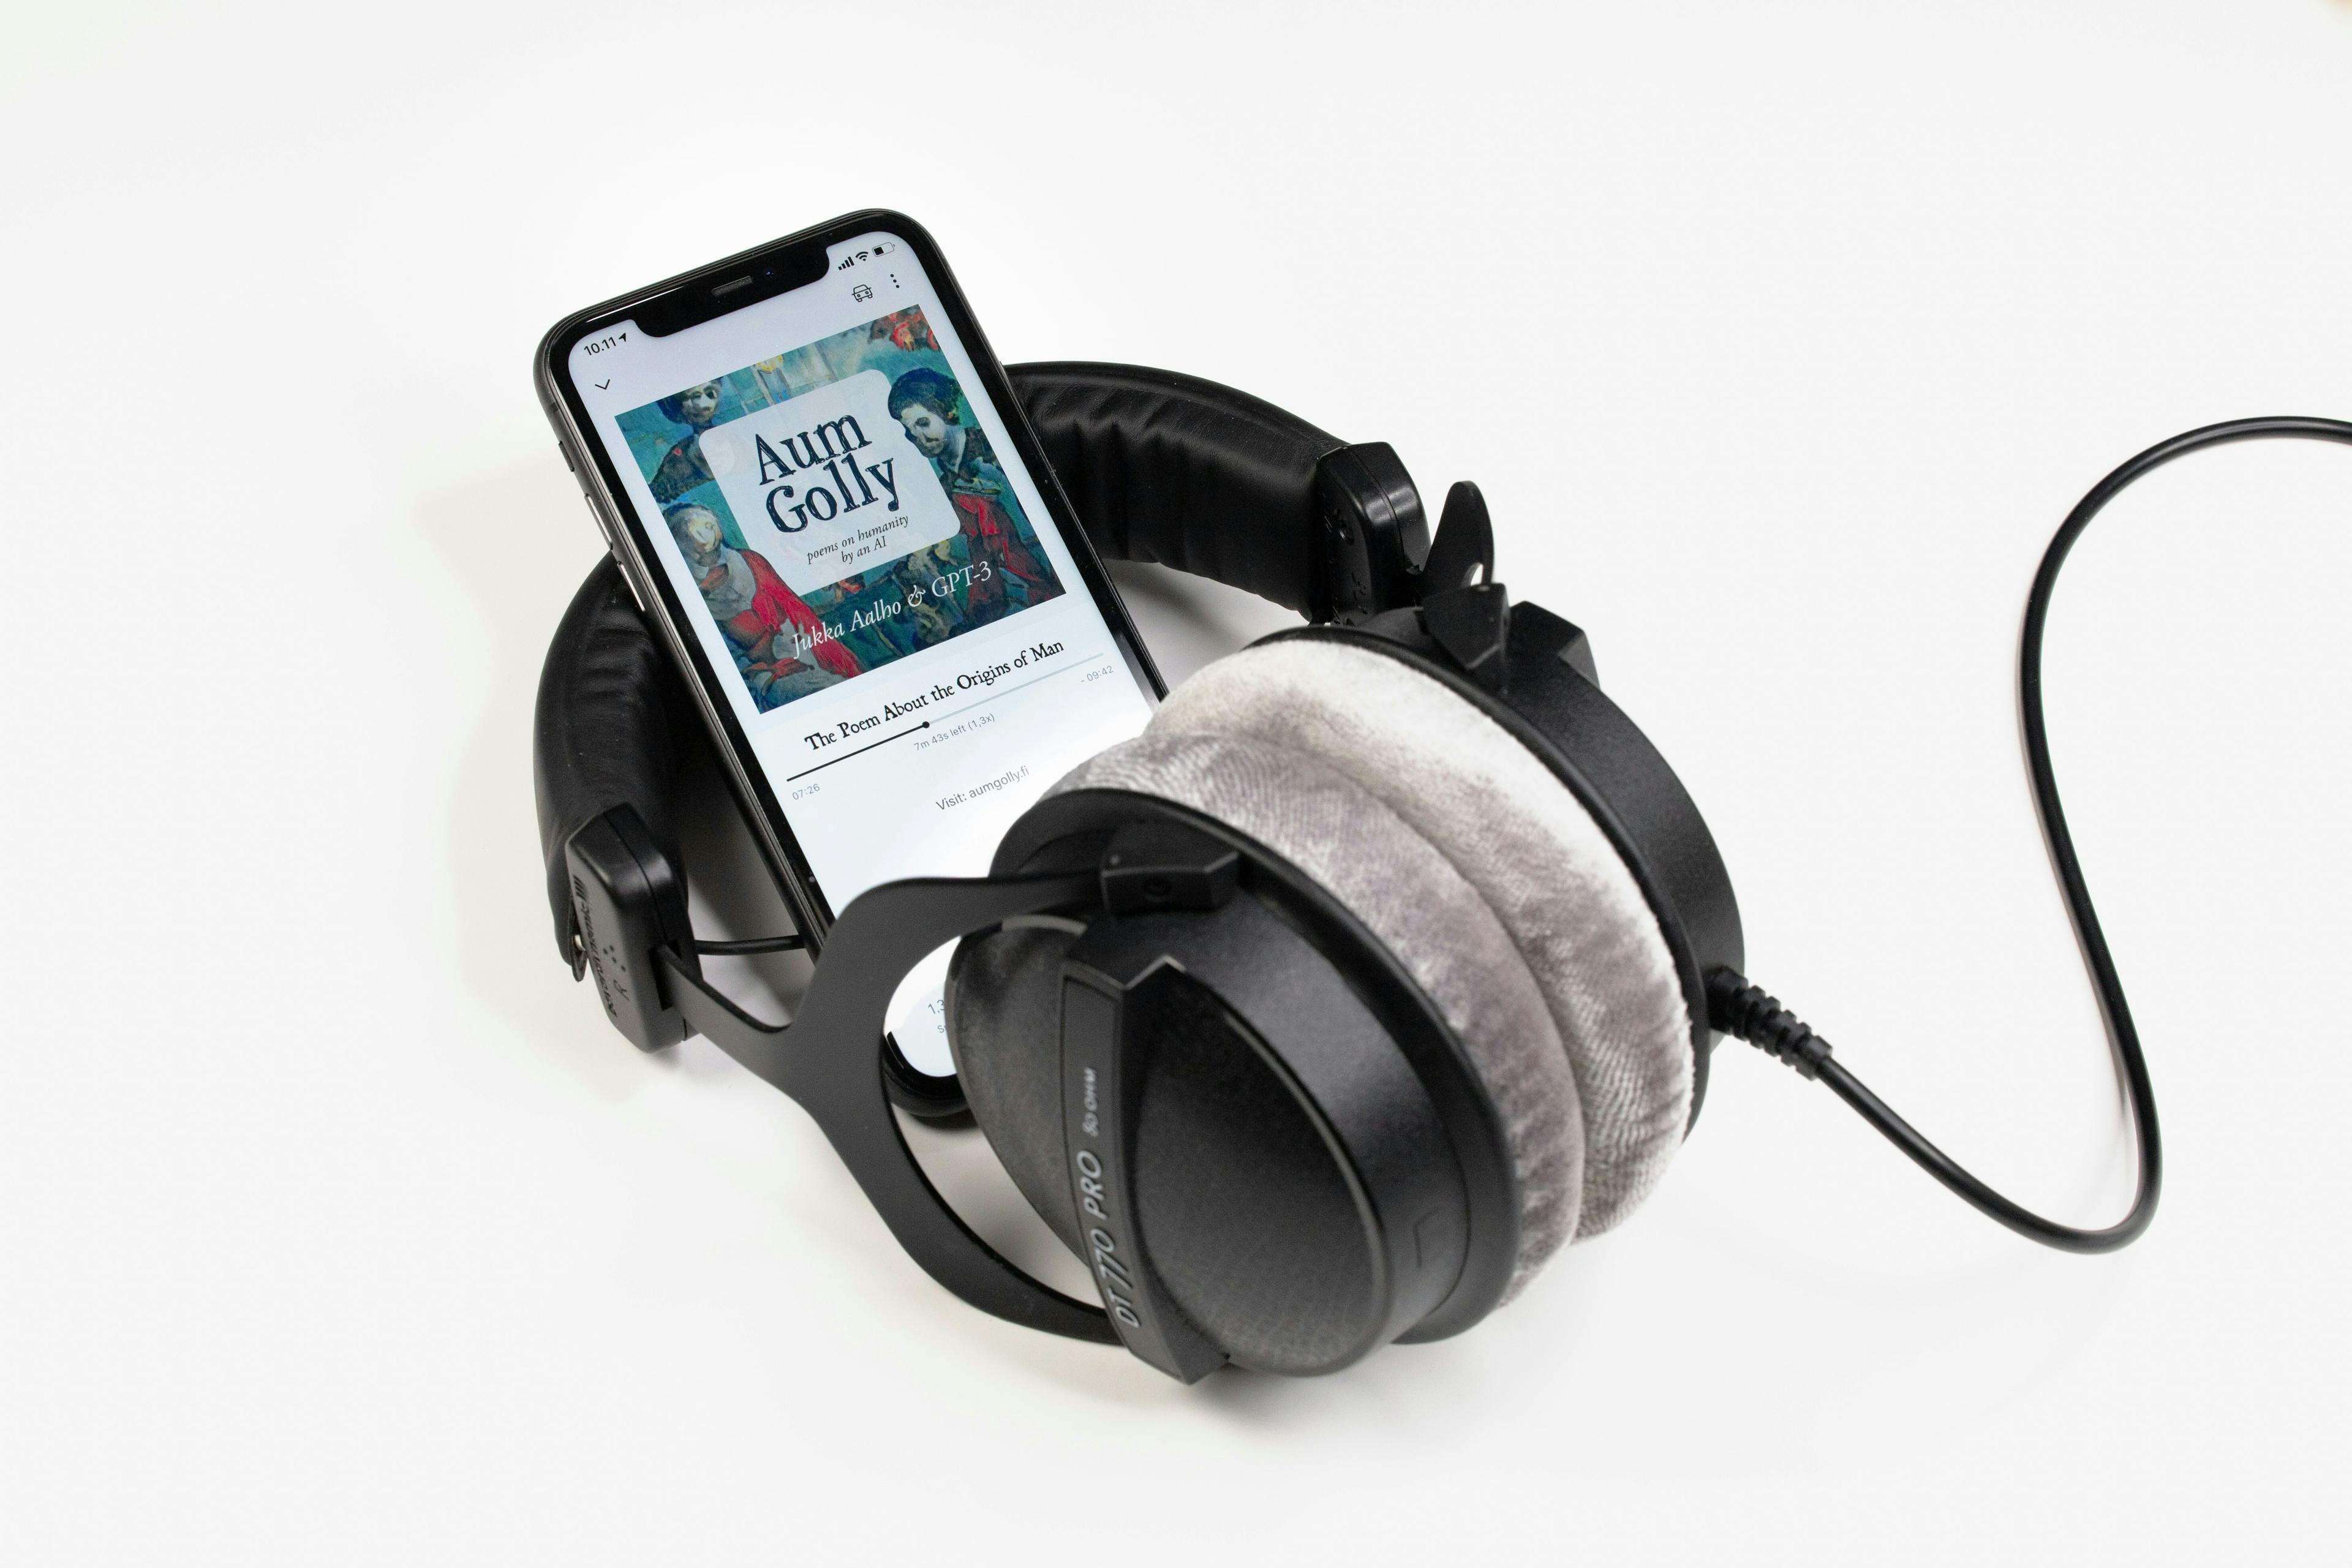 More Audiobook Recommendations